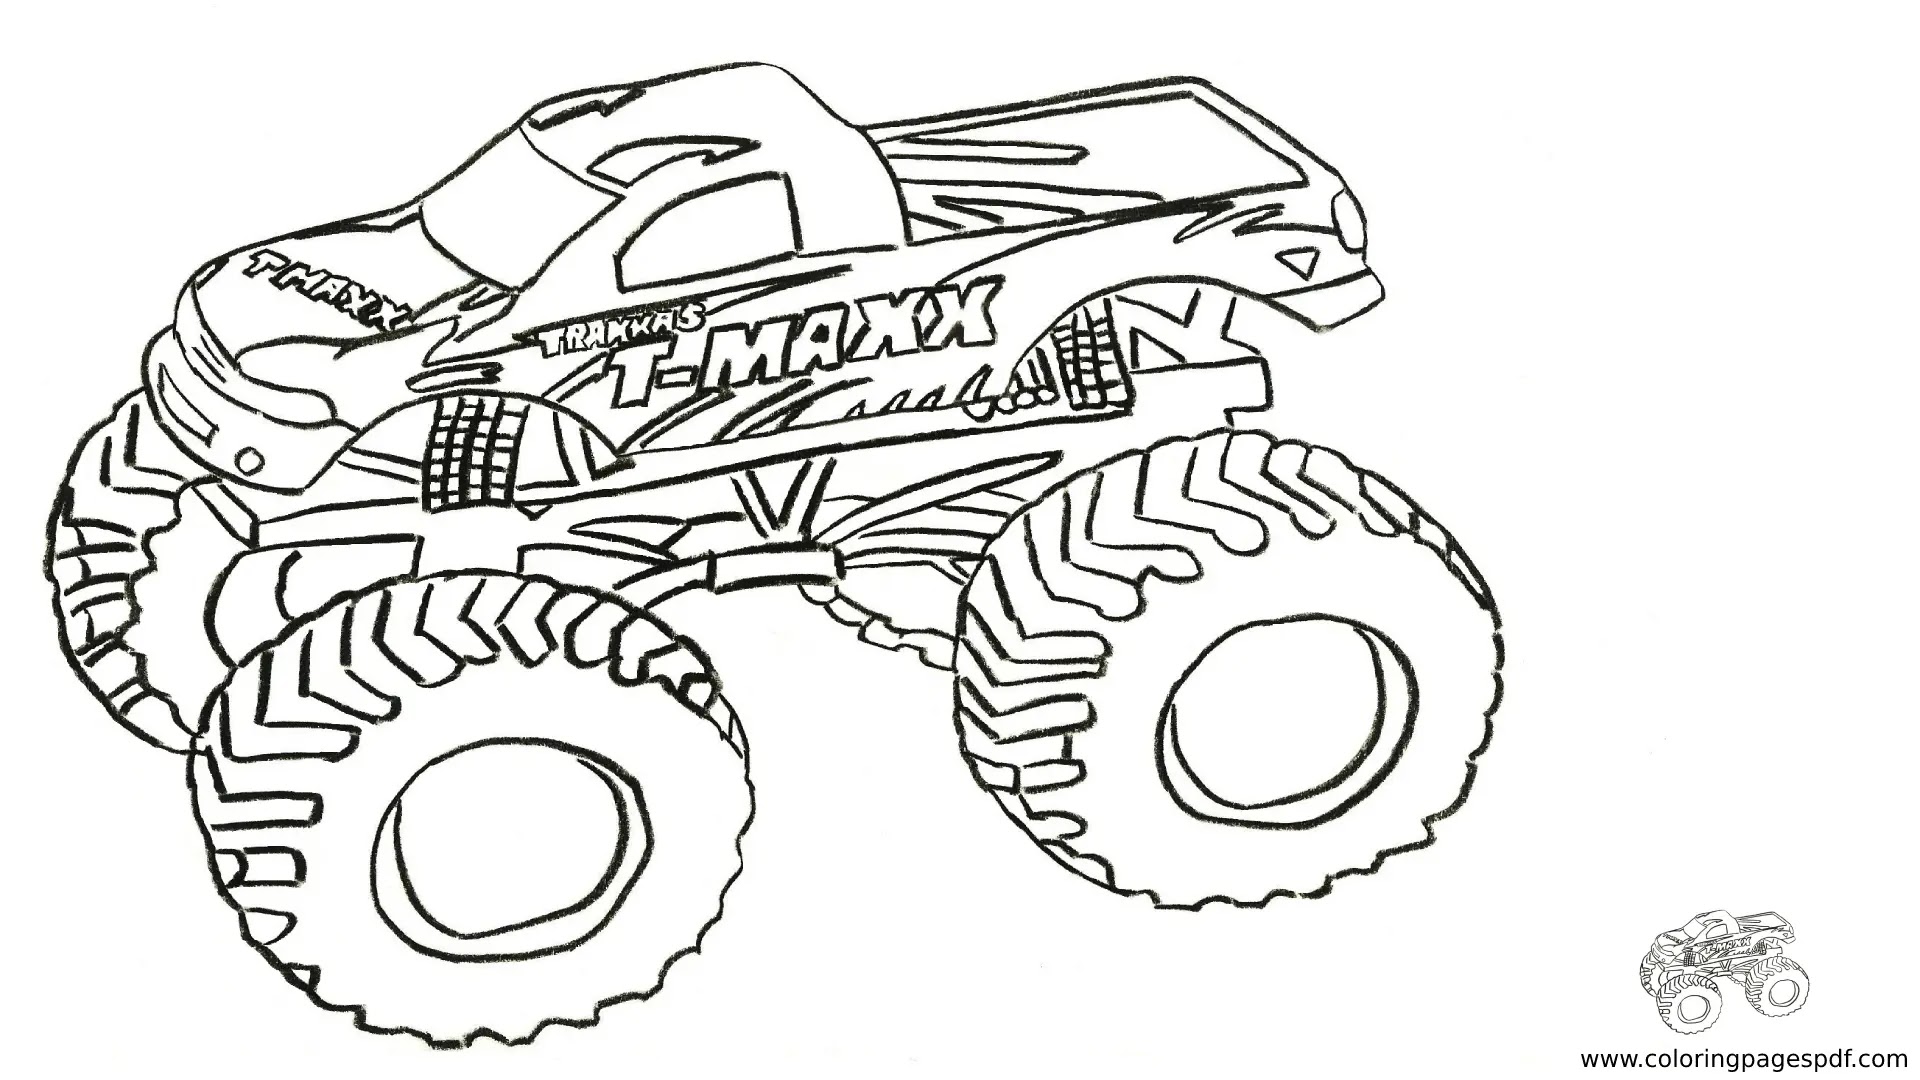 Coloring Pages Of A T-Maxx Monster Truck